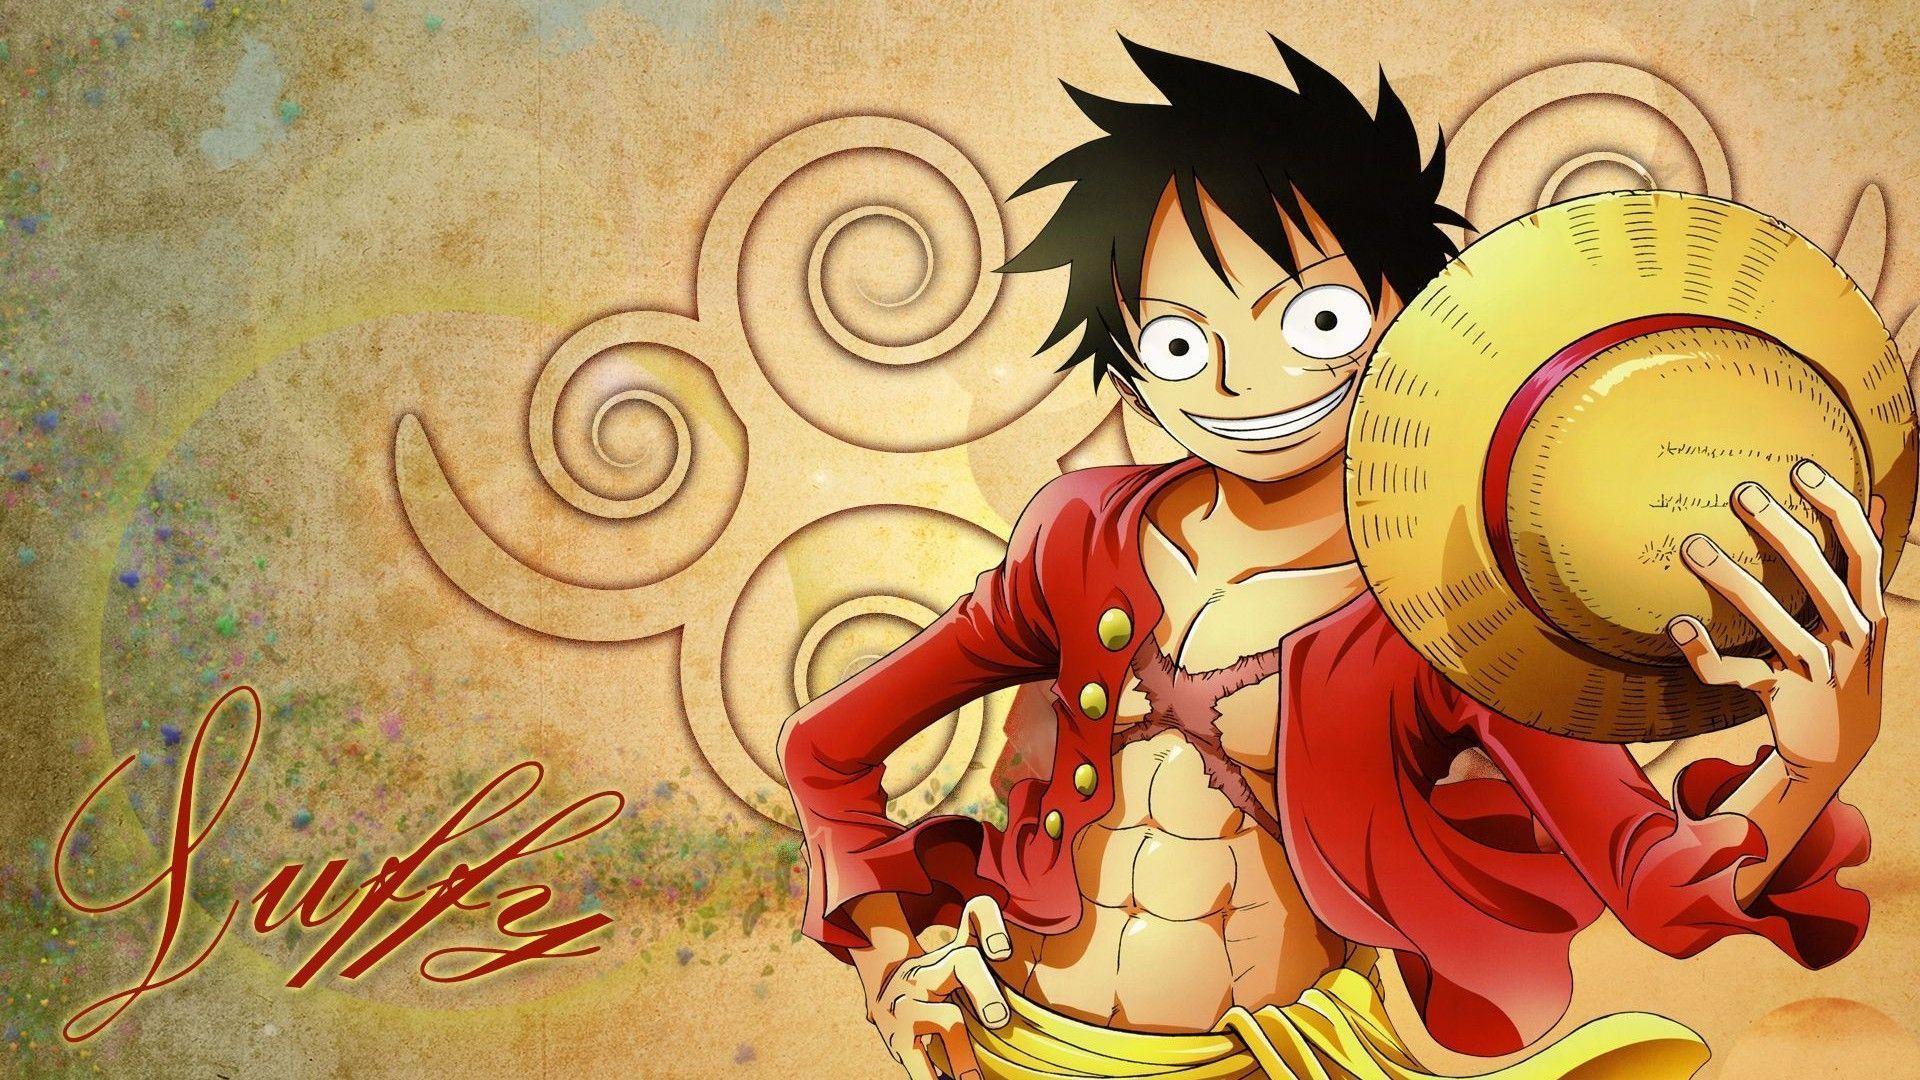 Luffy Render 2 / Wallpapers as